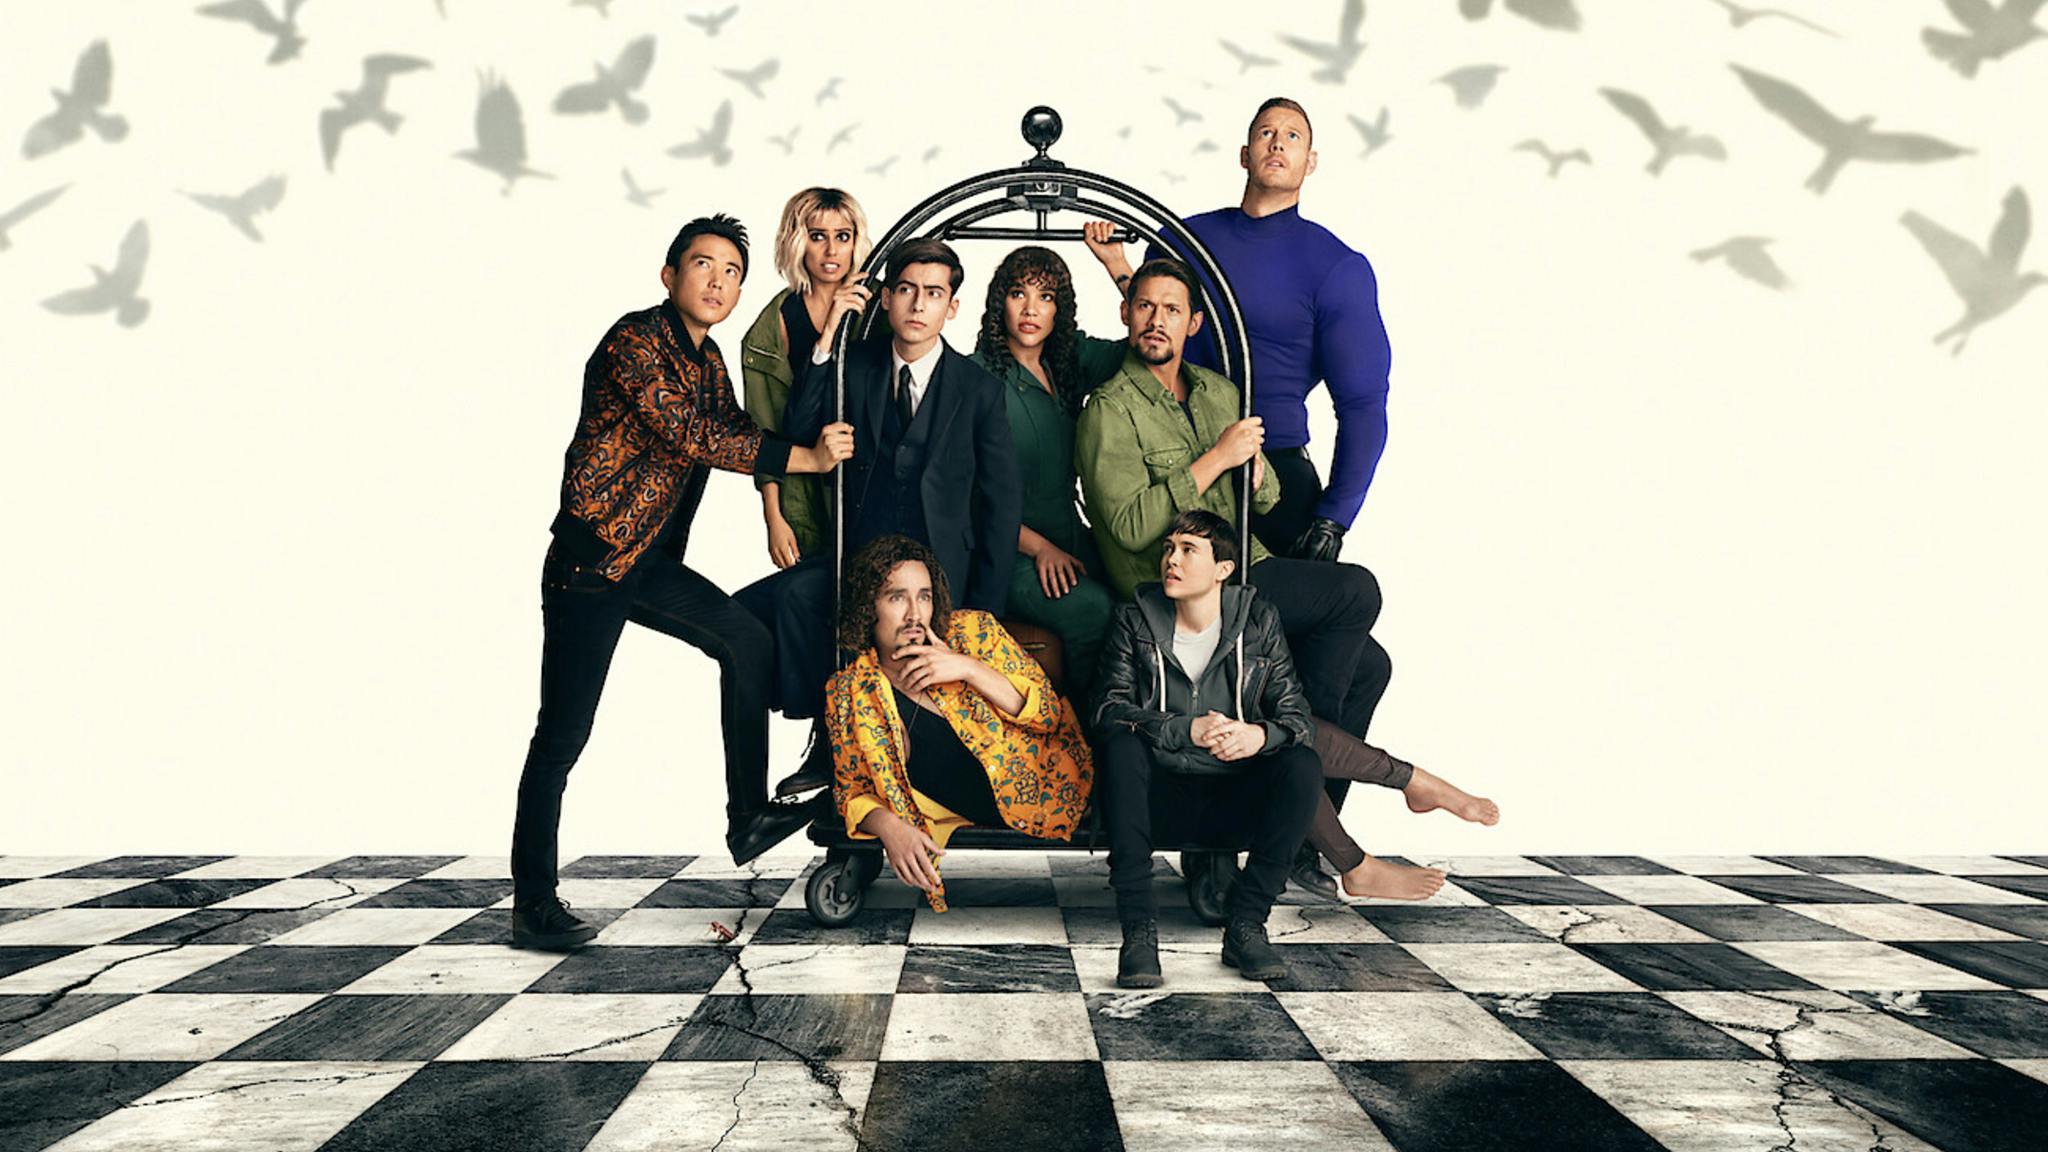 The fourth and final season of The Umbrella Academy will premiere in 2024